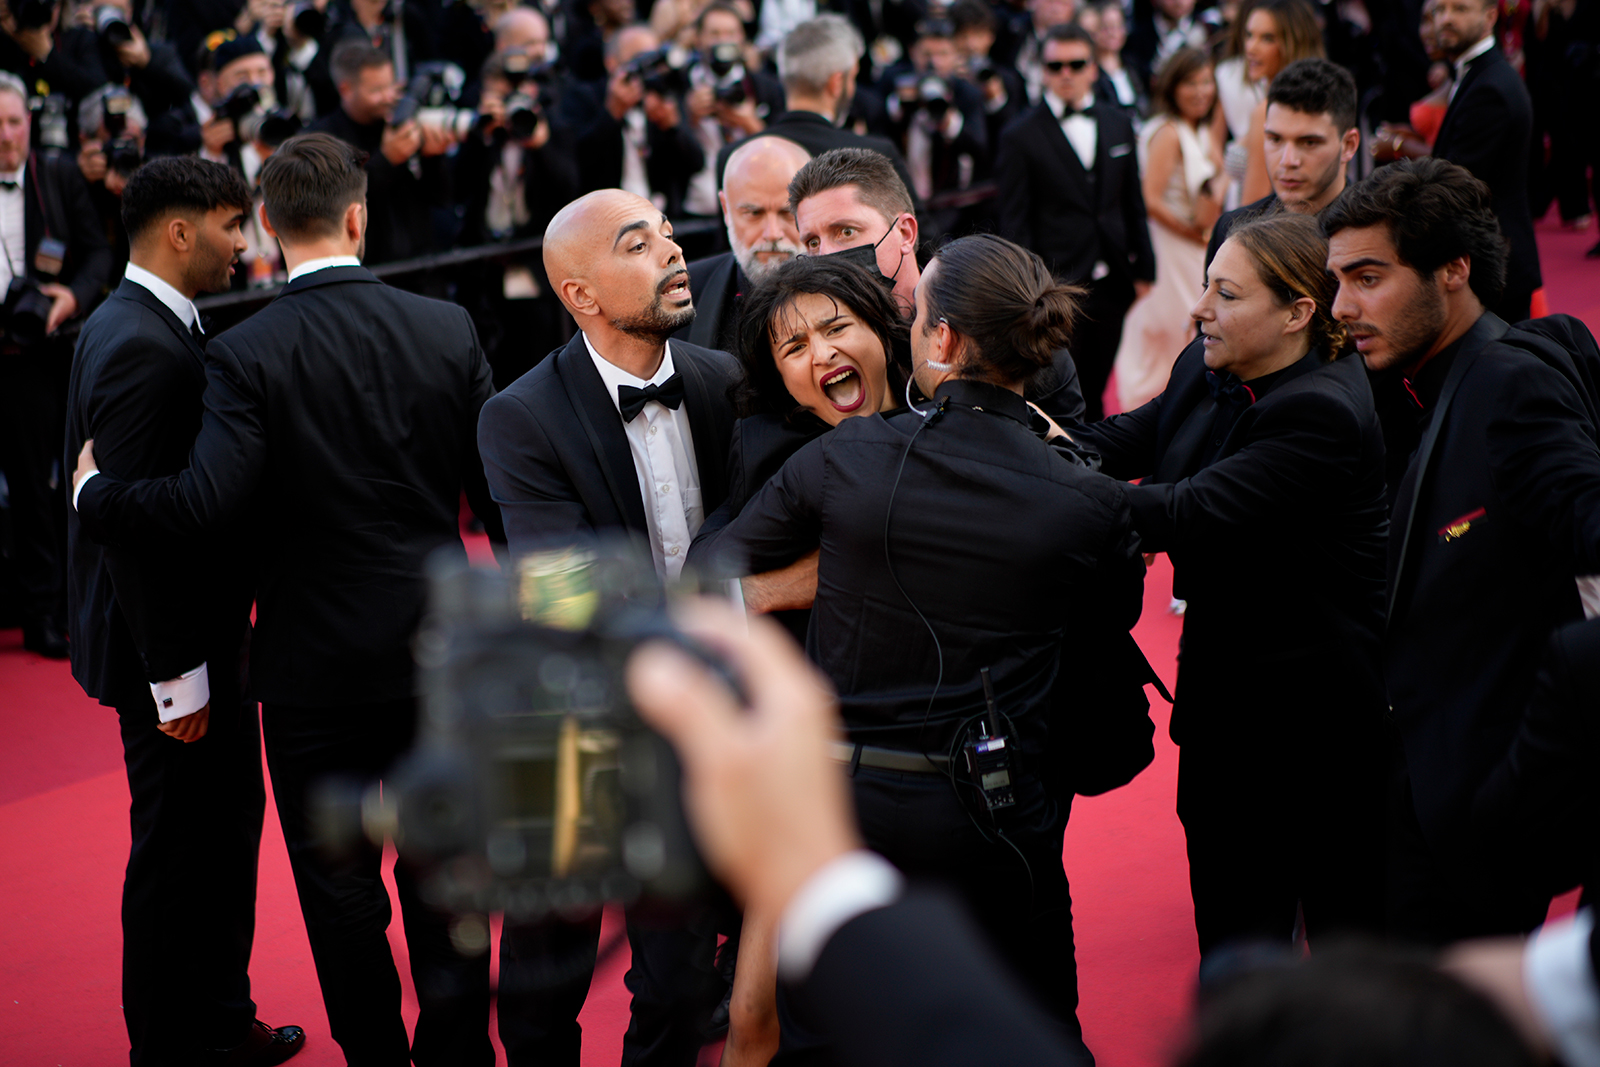 A protester wearing body paint that reads "Stop Raping Us" in the color of the Ukrainian flag is removed from the red carpet at the Cannes film festival in France on May 20.